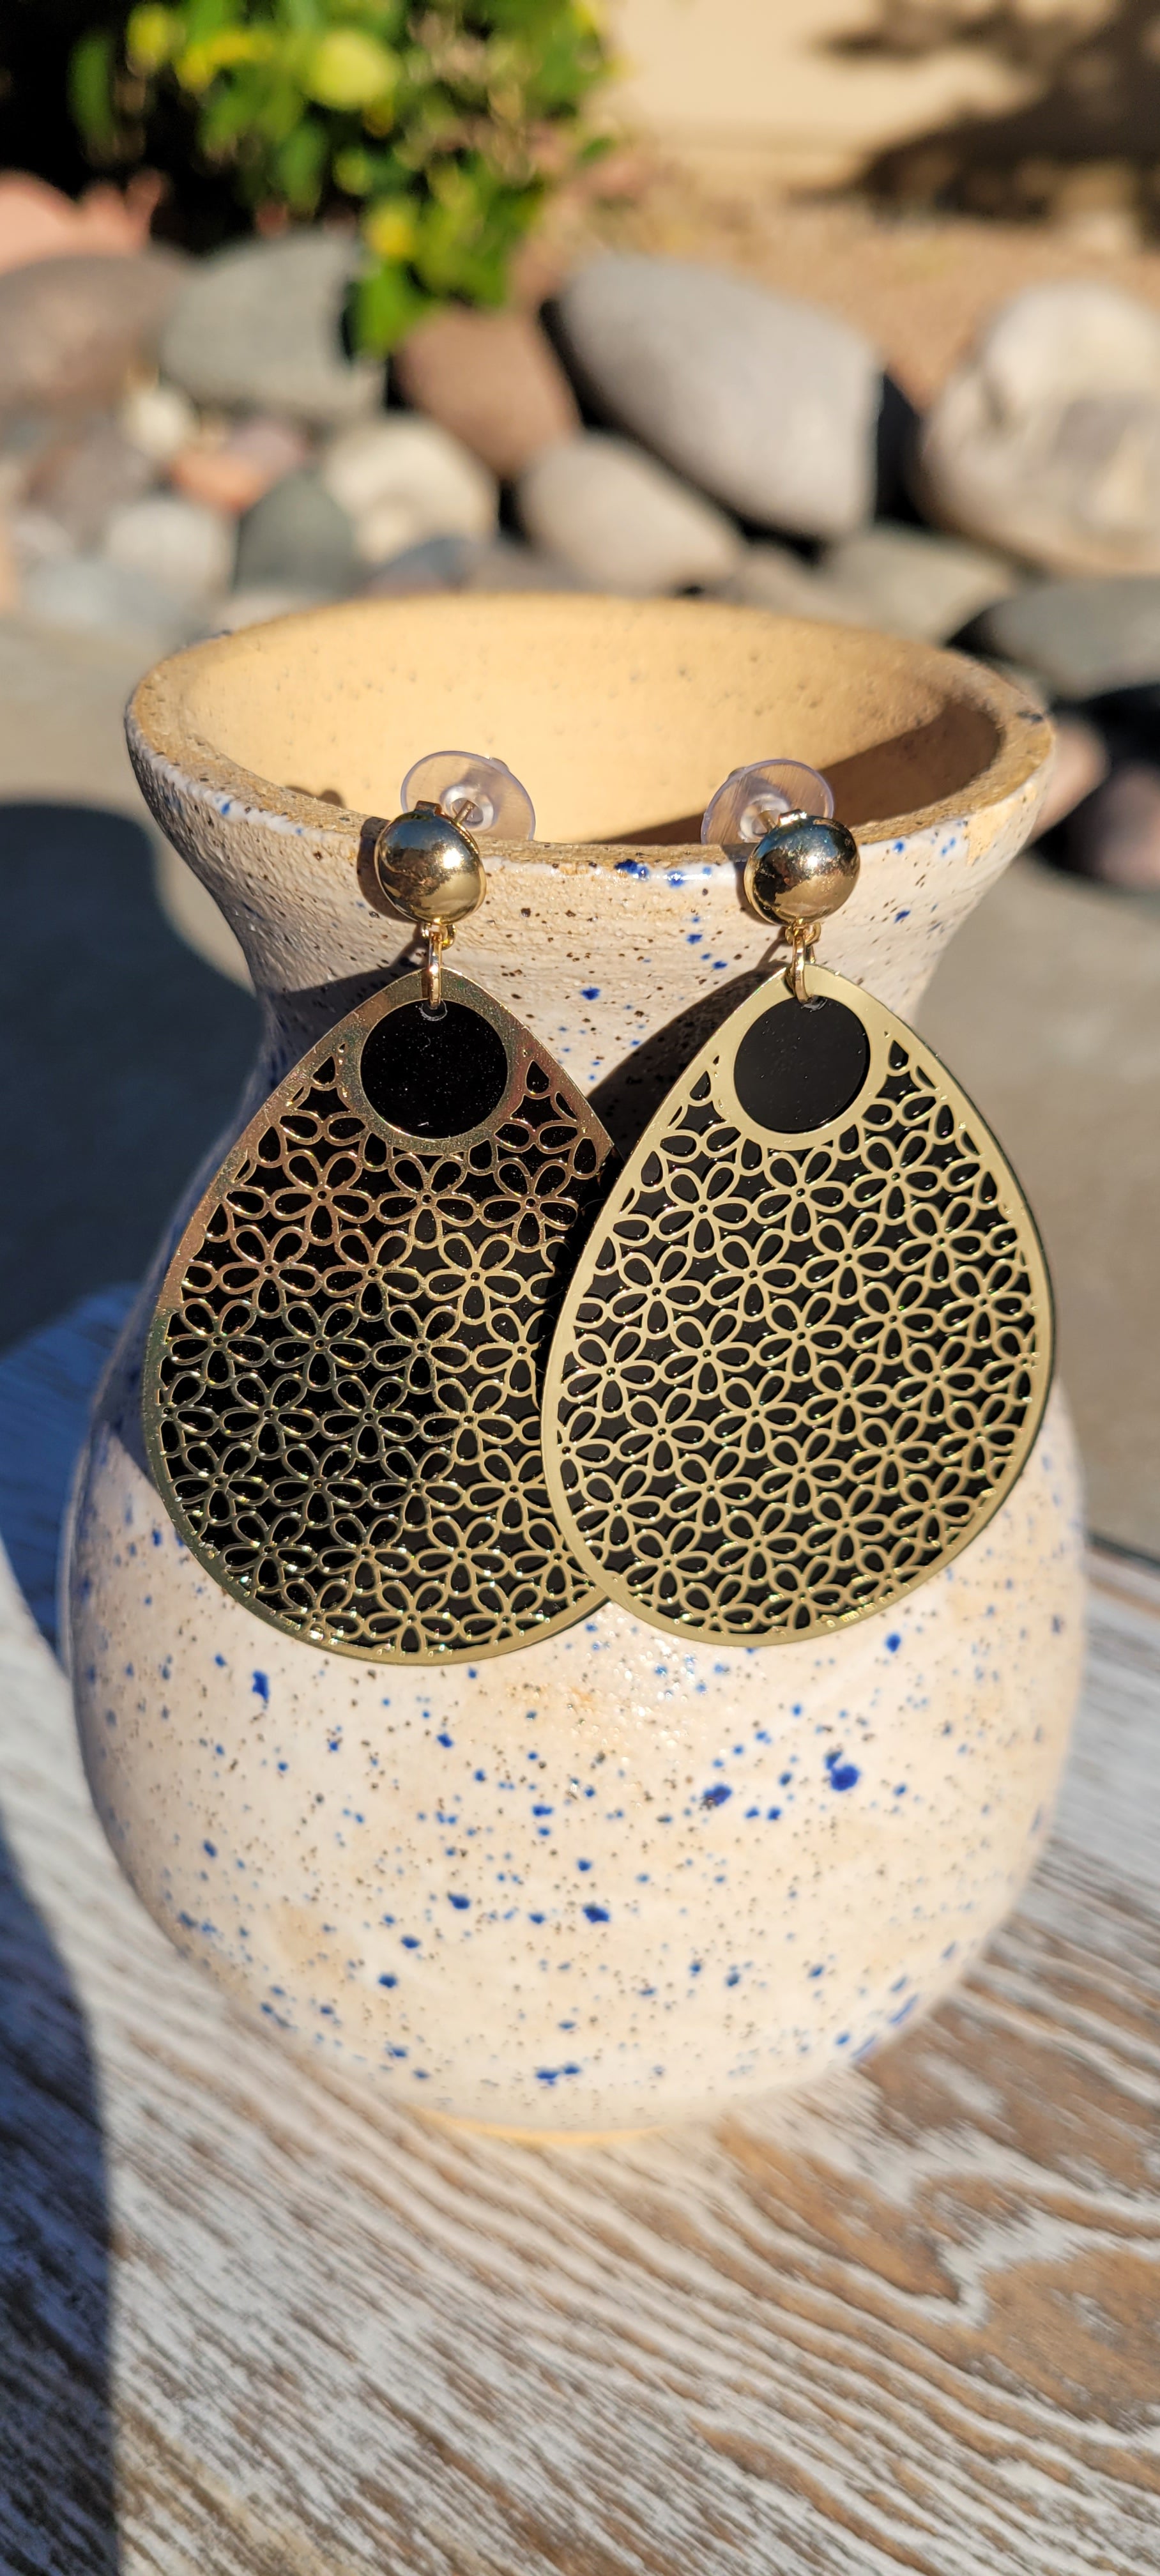 Pear shape Layered brushed gold metal and black acrylic Brushed gold stud dangle earrings Rubber earring back Drop length 1.625” Whether you want to be on the wild side or classy this earring set it will add a fun touch to your outfit